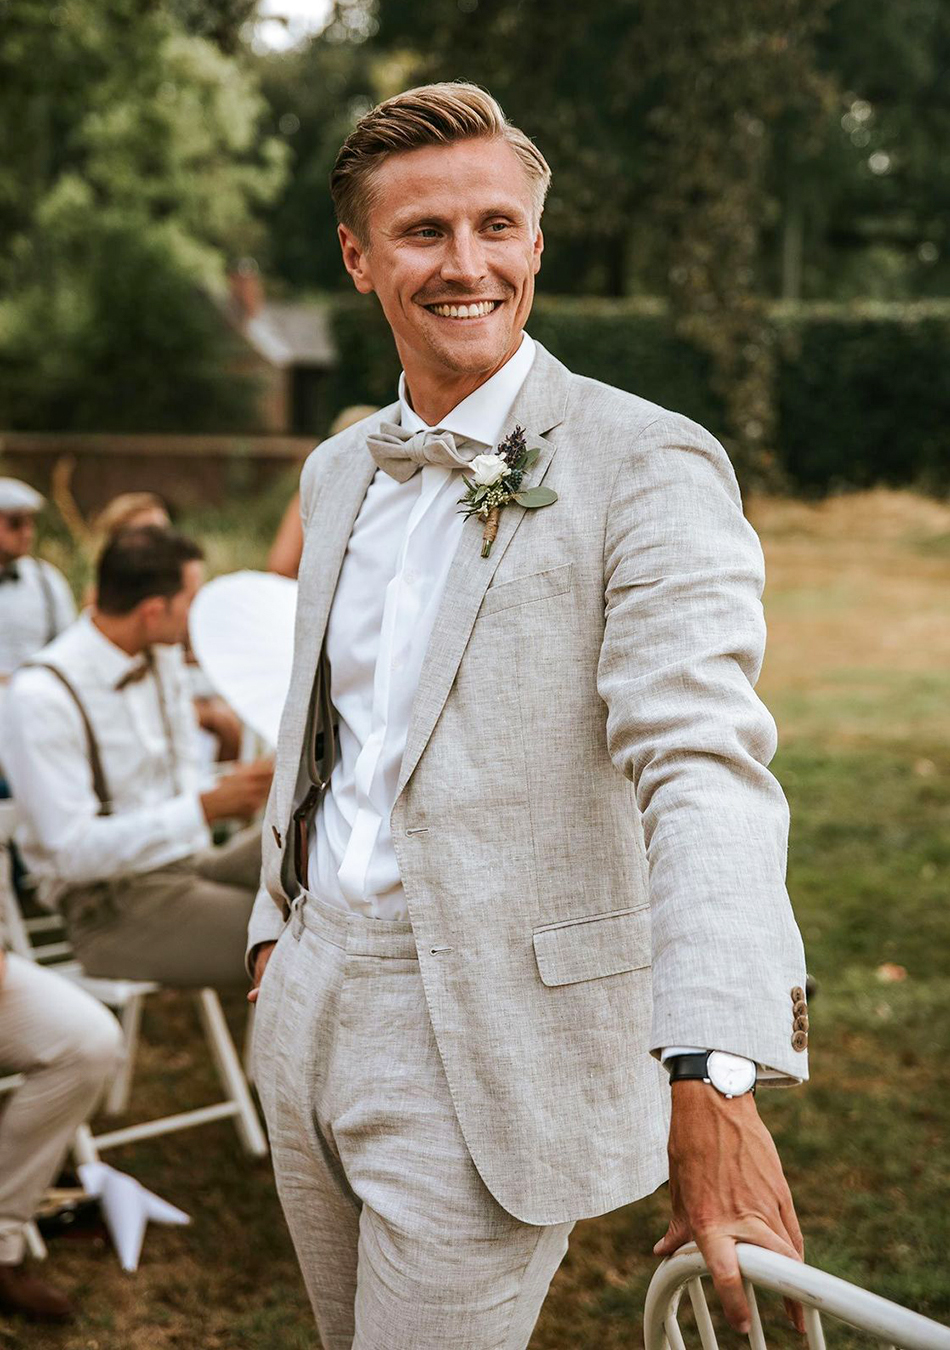 Wearing a tan linen suit and white dress shirt for a wedding